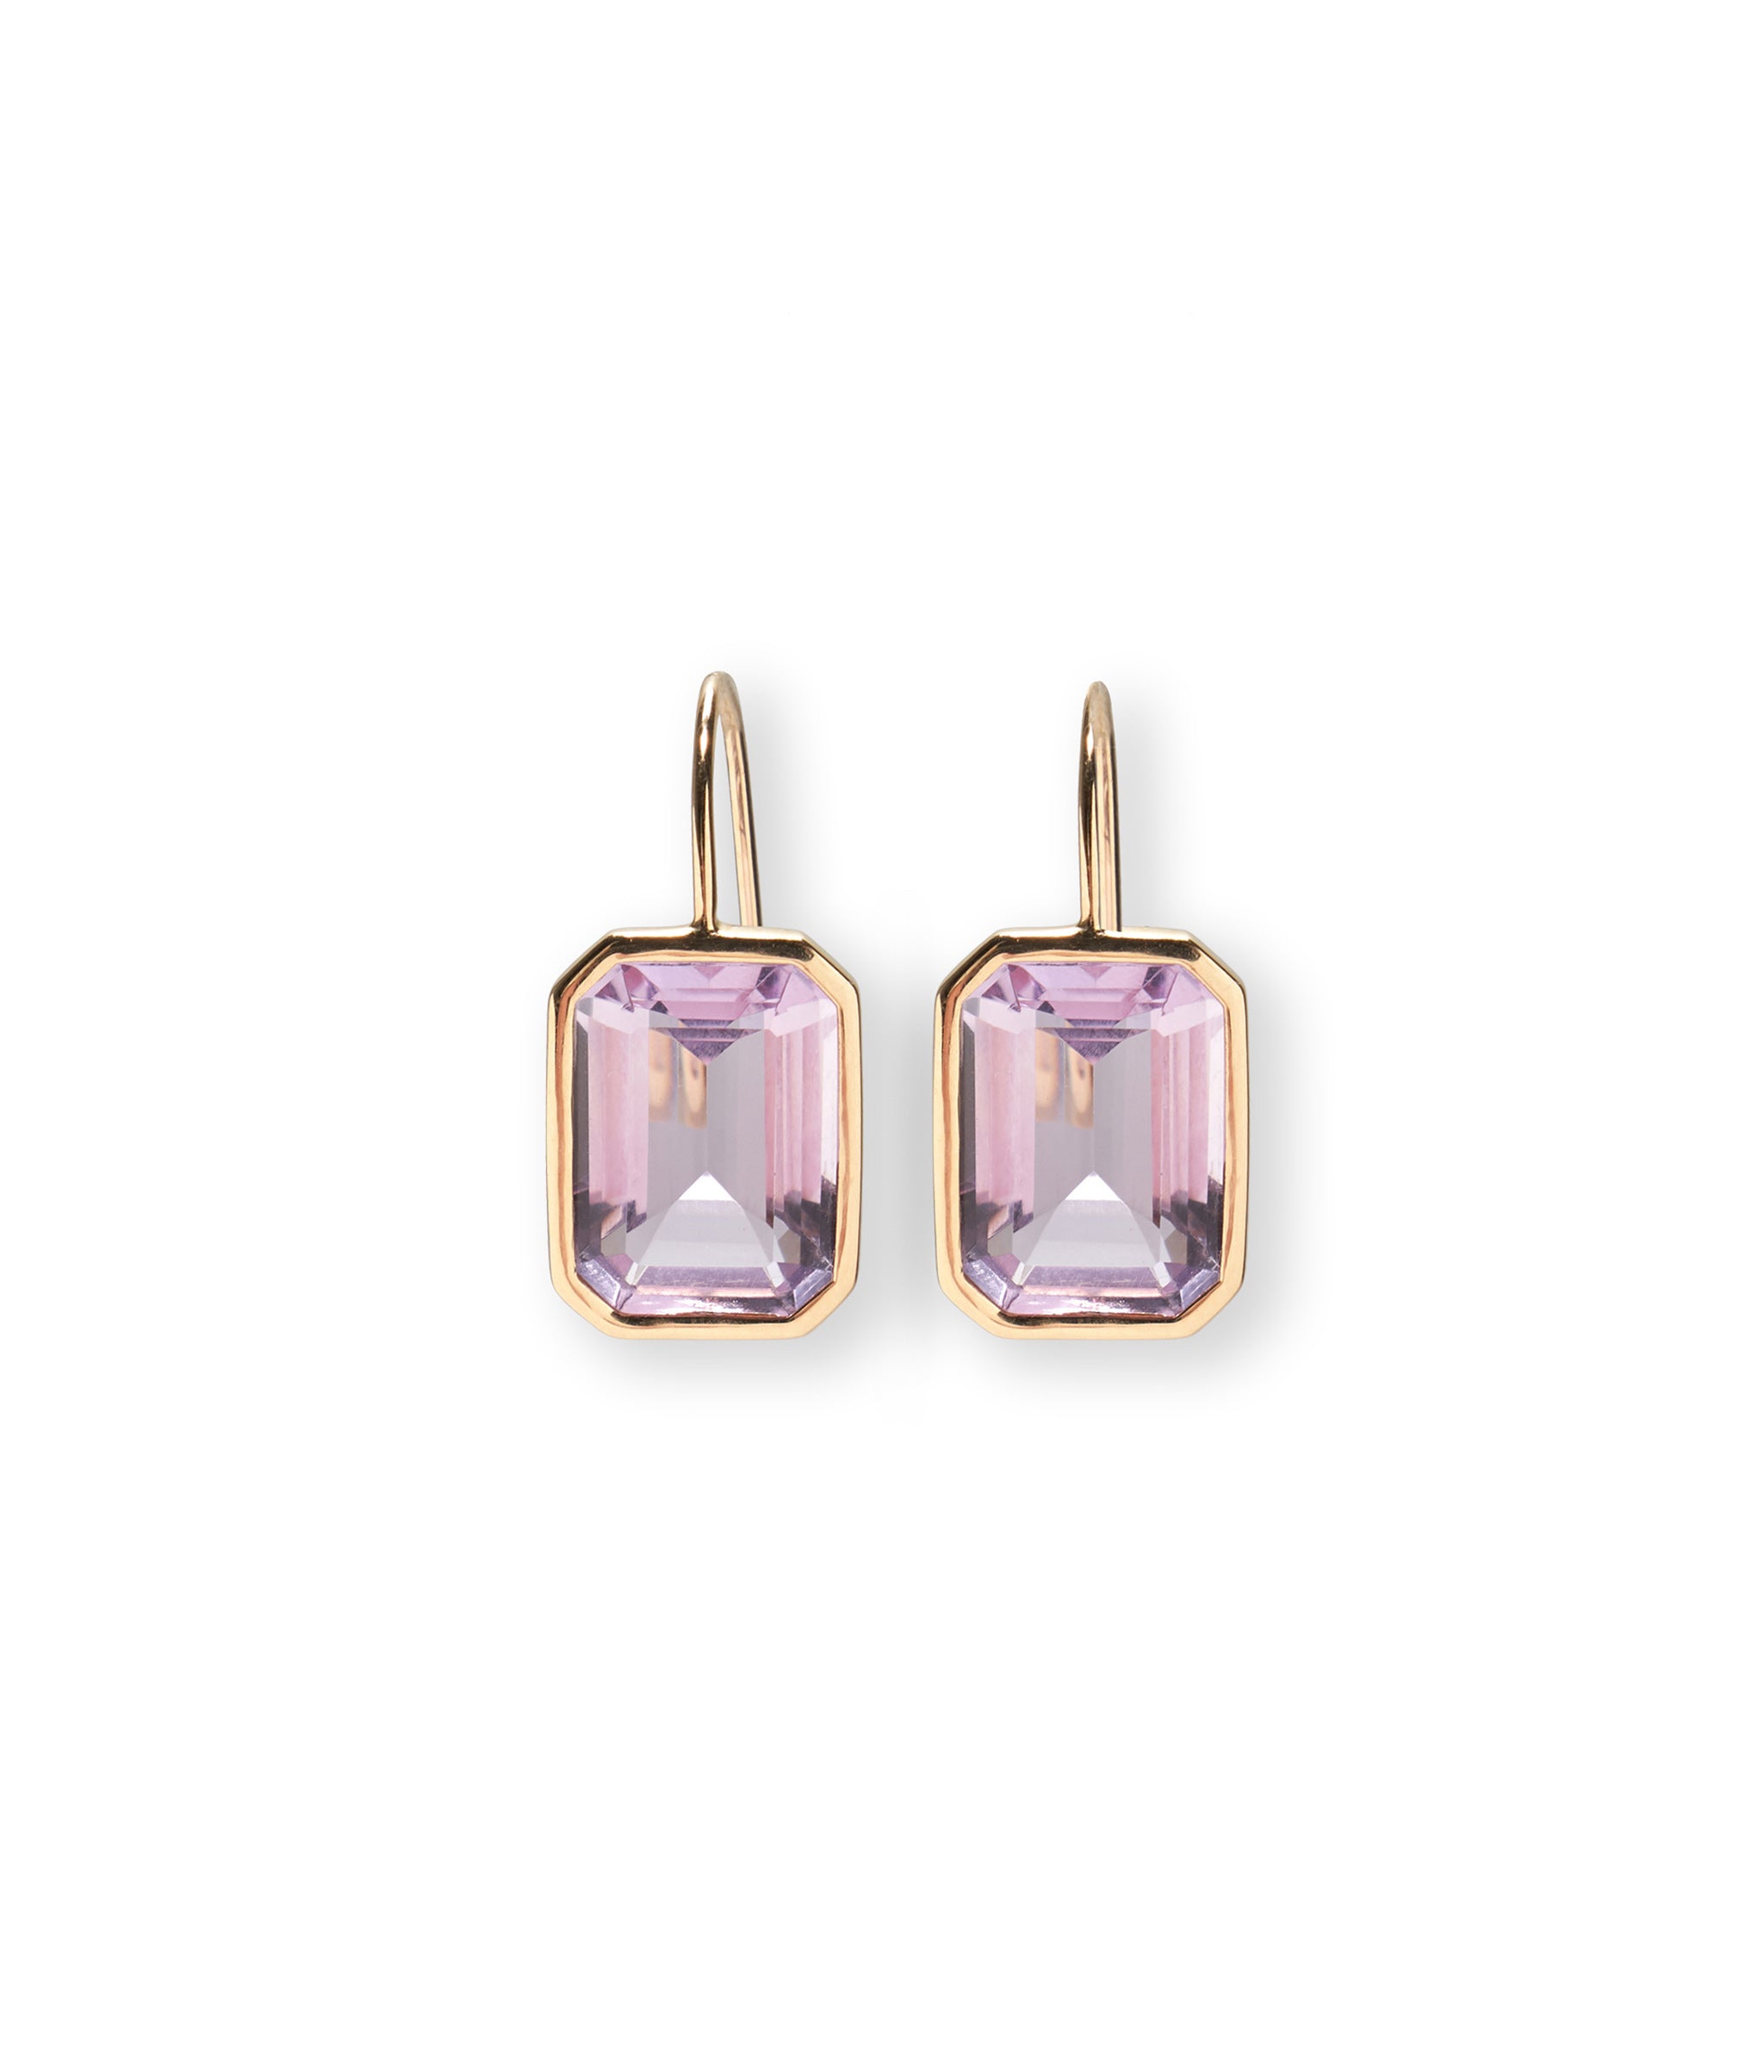 Aria Earrings in Pink Amethyst. Featuring large, faceted pink amethyst stones with 14k gold bezels and earwires.